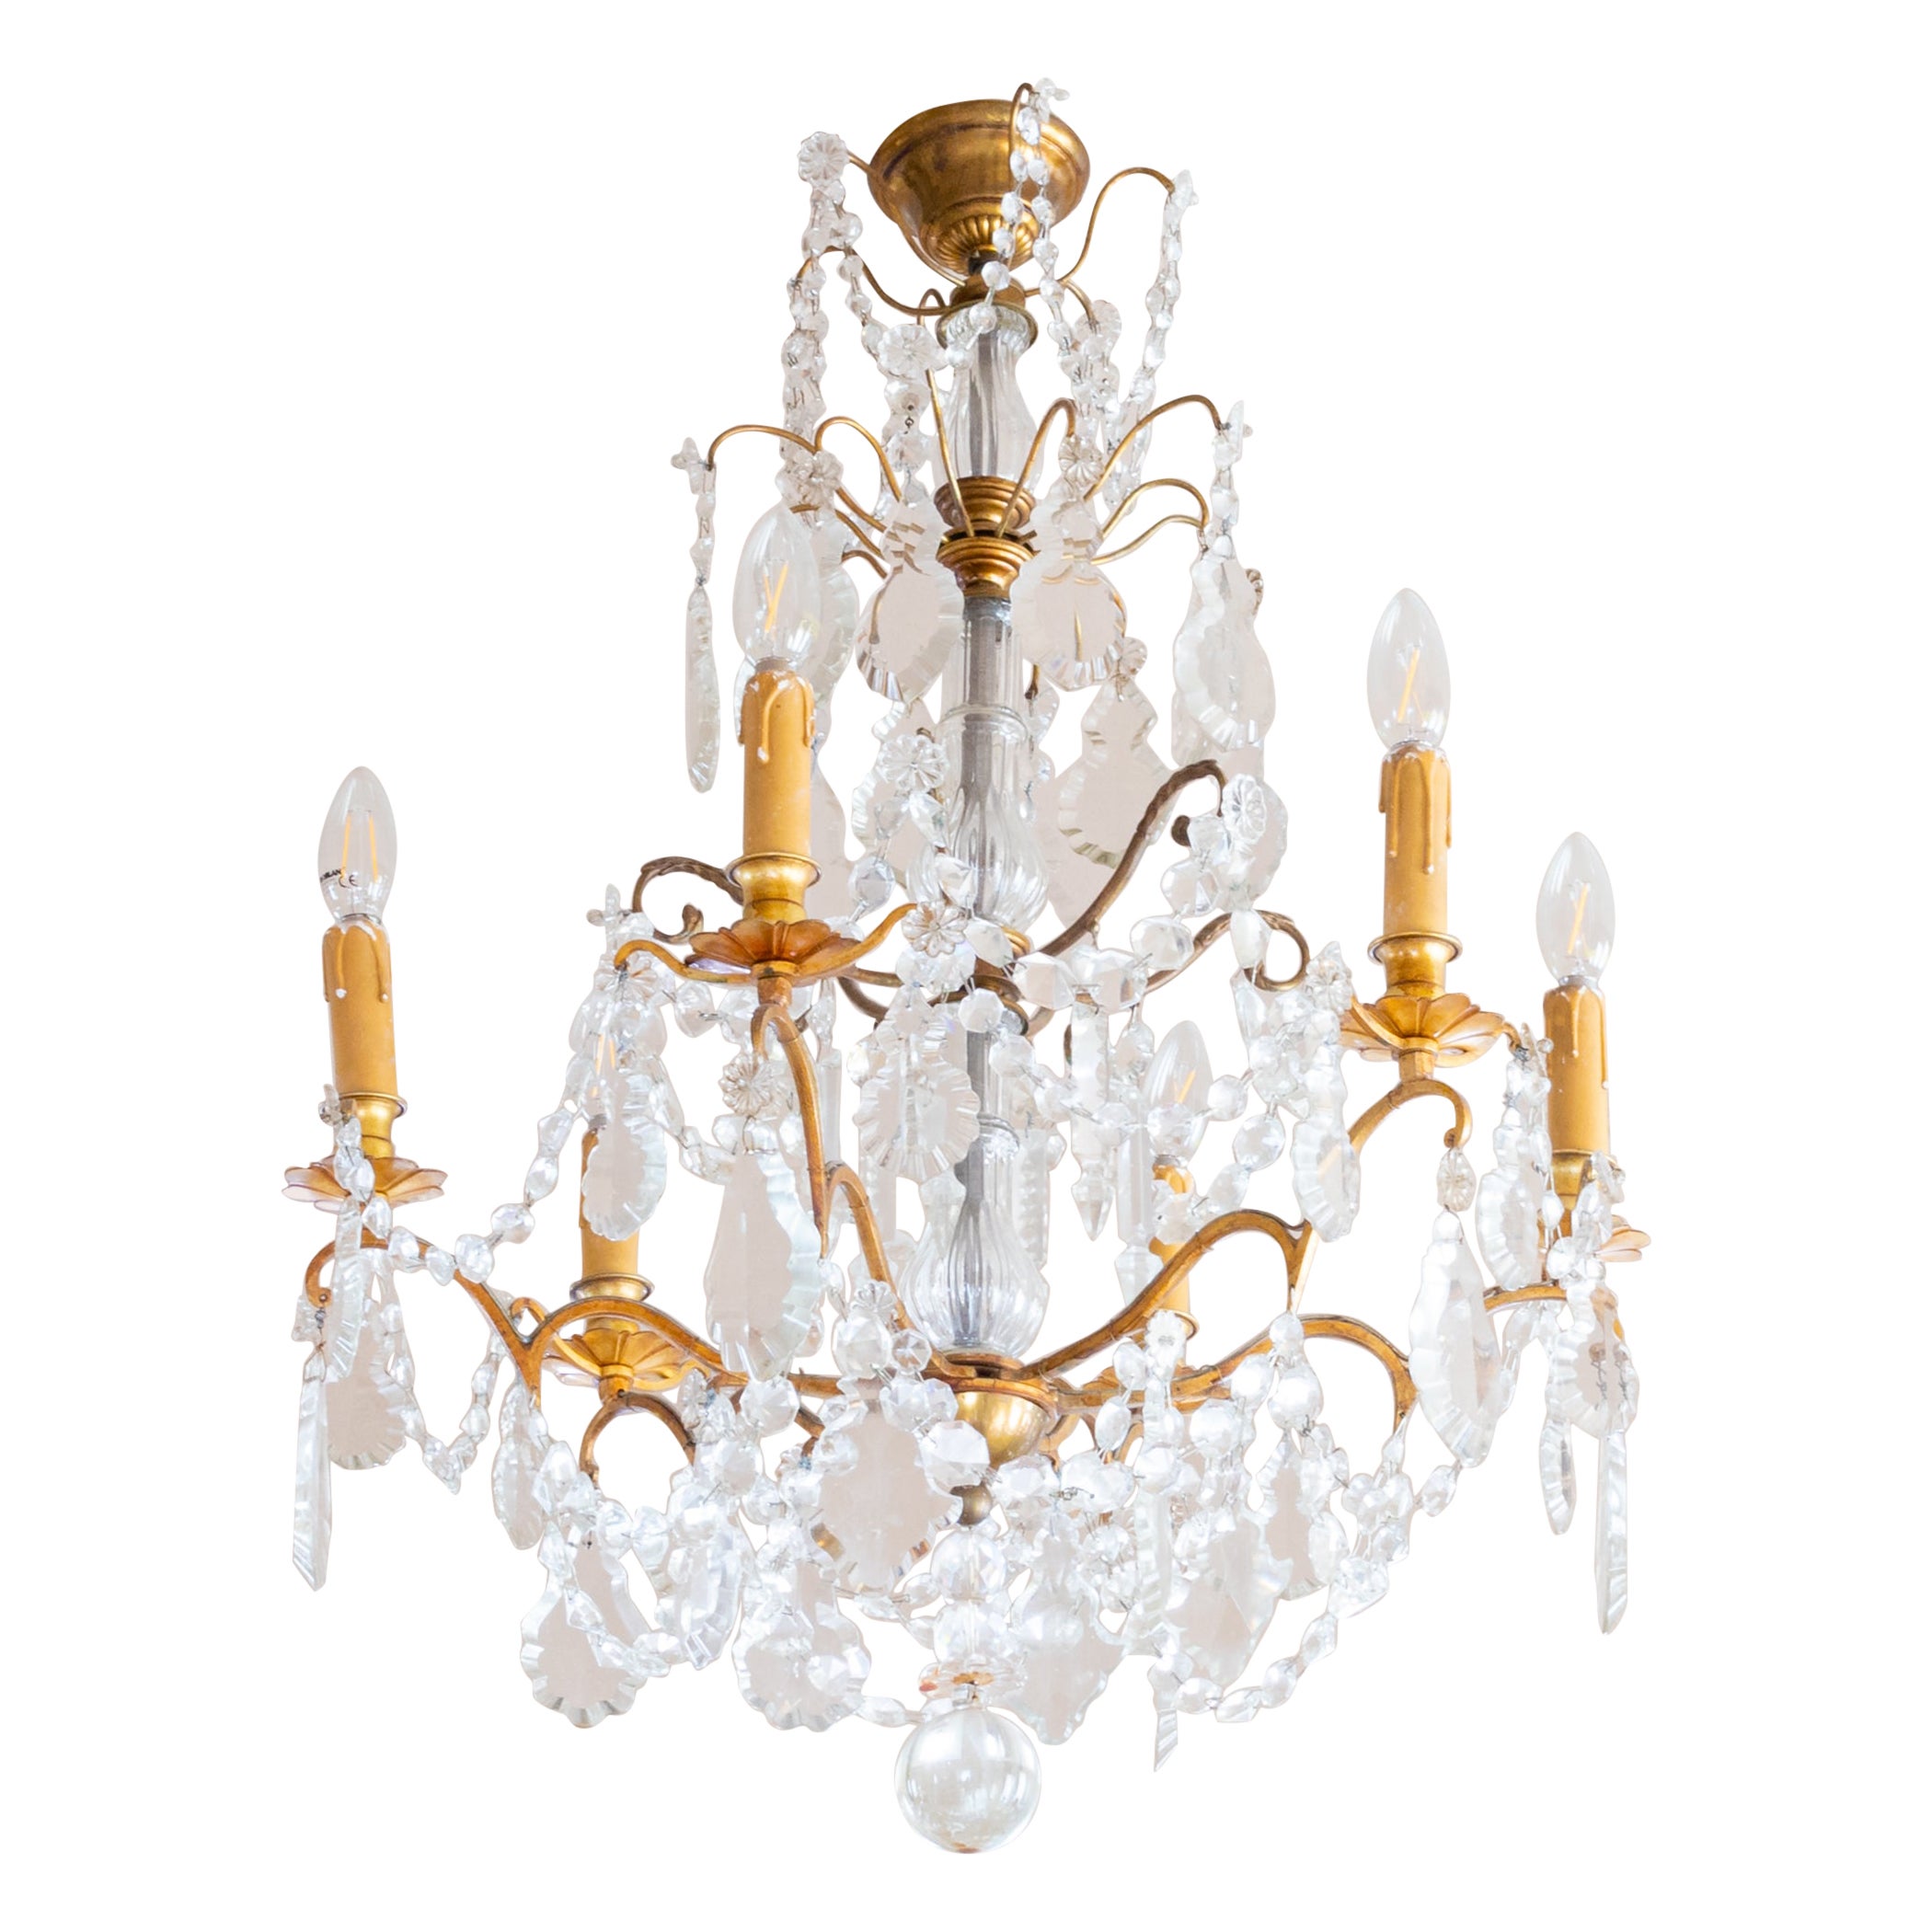 A french Louis XV-Style bronze and crystal chandelier with various crystal and glass pendants and finials, six candlestick holders fully rewired and six light sockets.

The chandelier is currently wired for both European Union and US standards LED